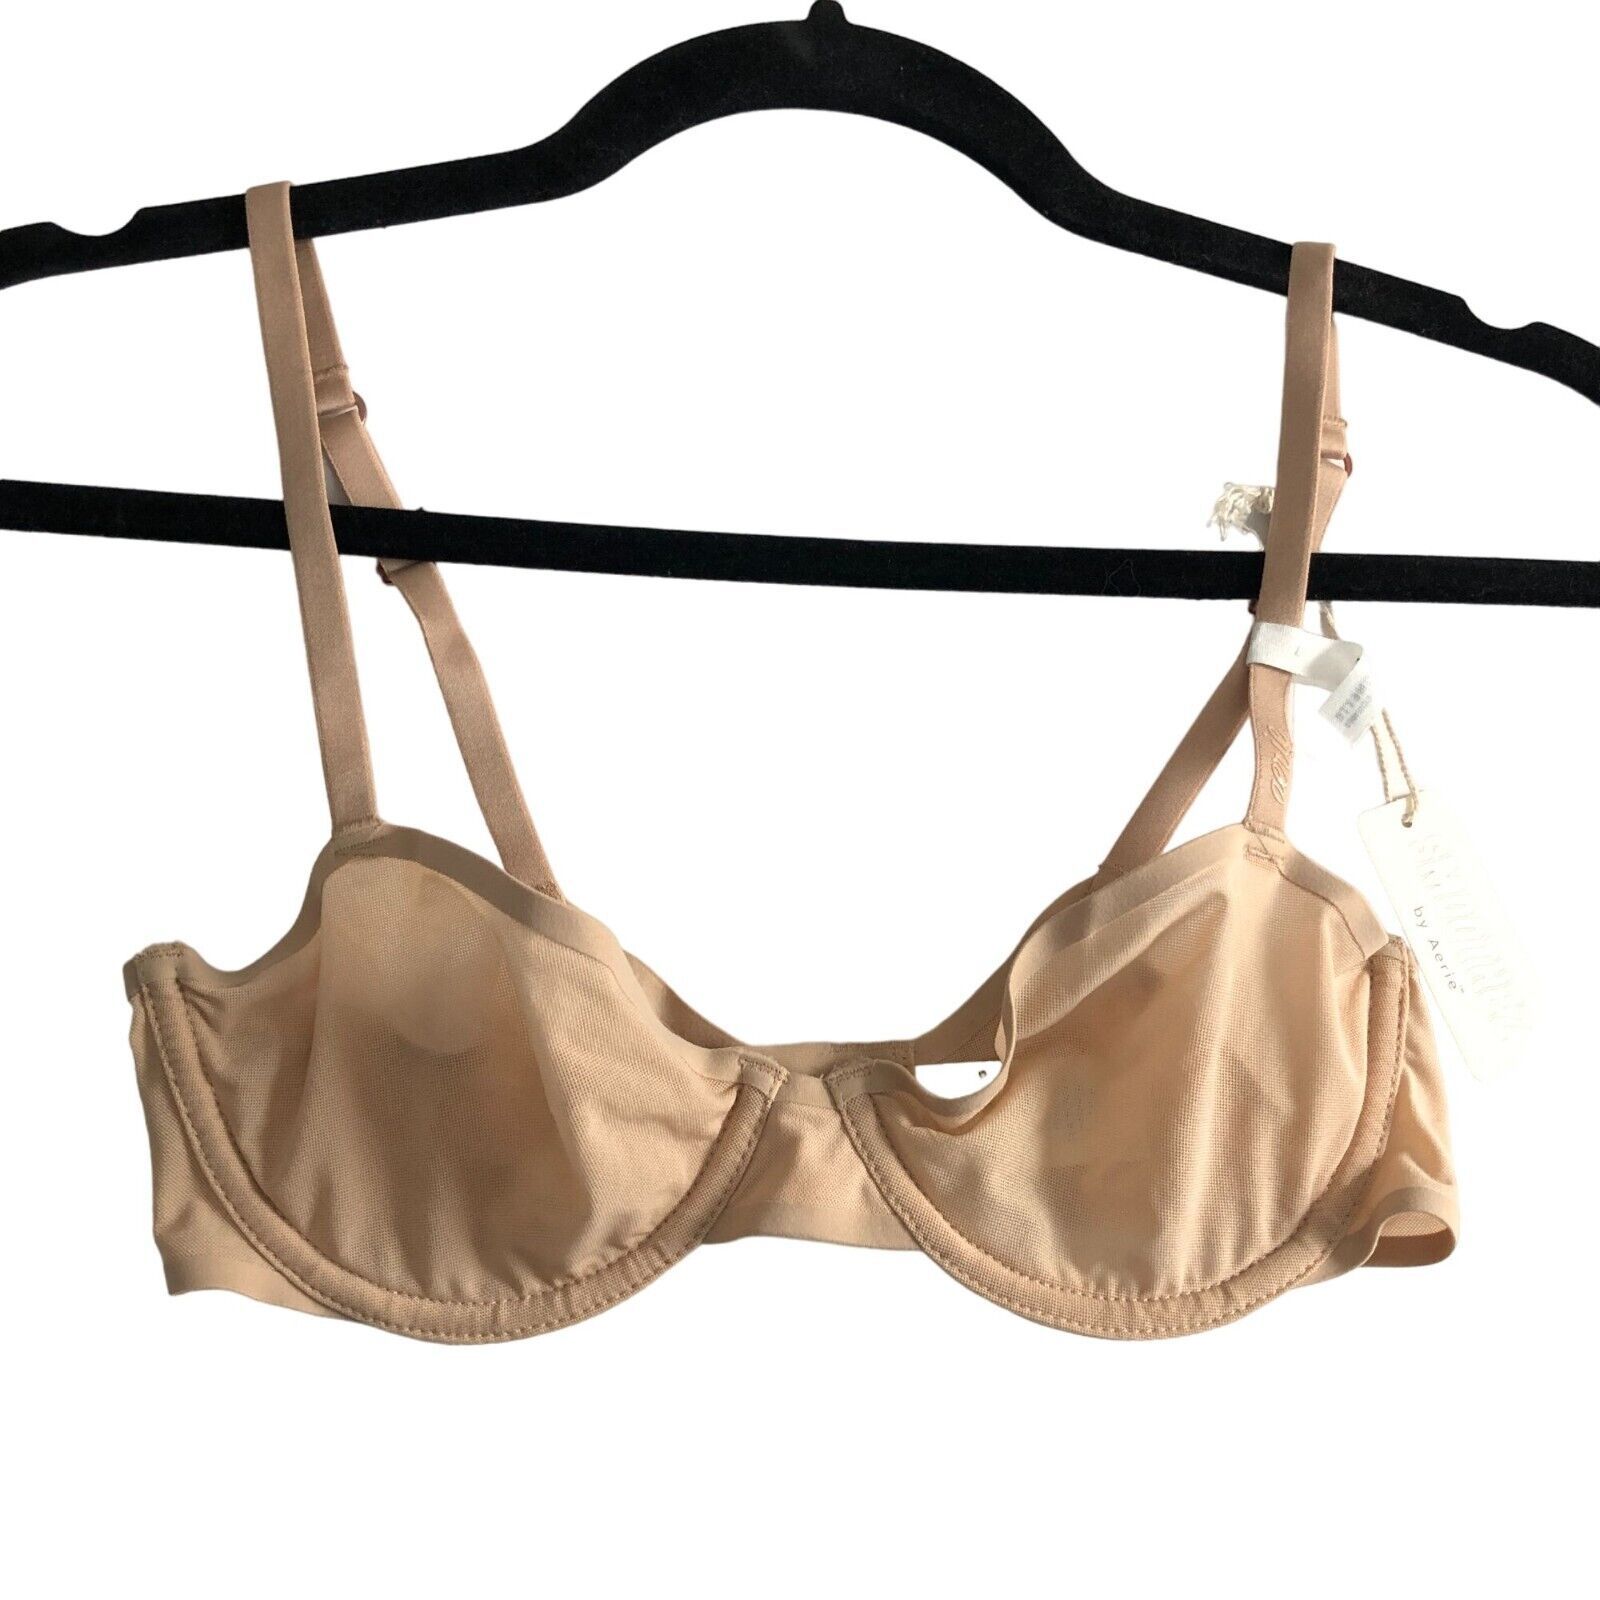 Primary image for Smoothez by Aerie Bra Balconette Sheer Mesh Unlined Underwire Beige 36D